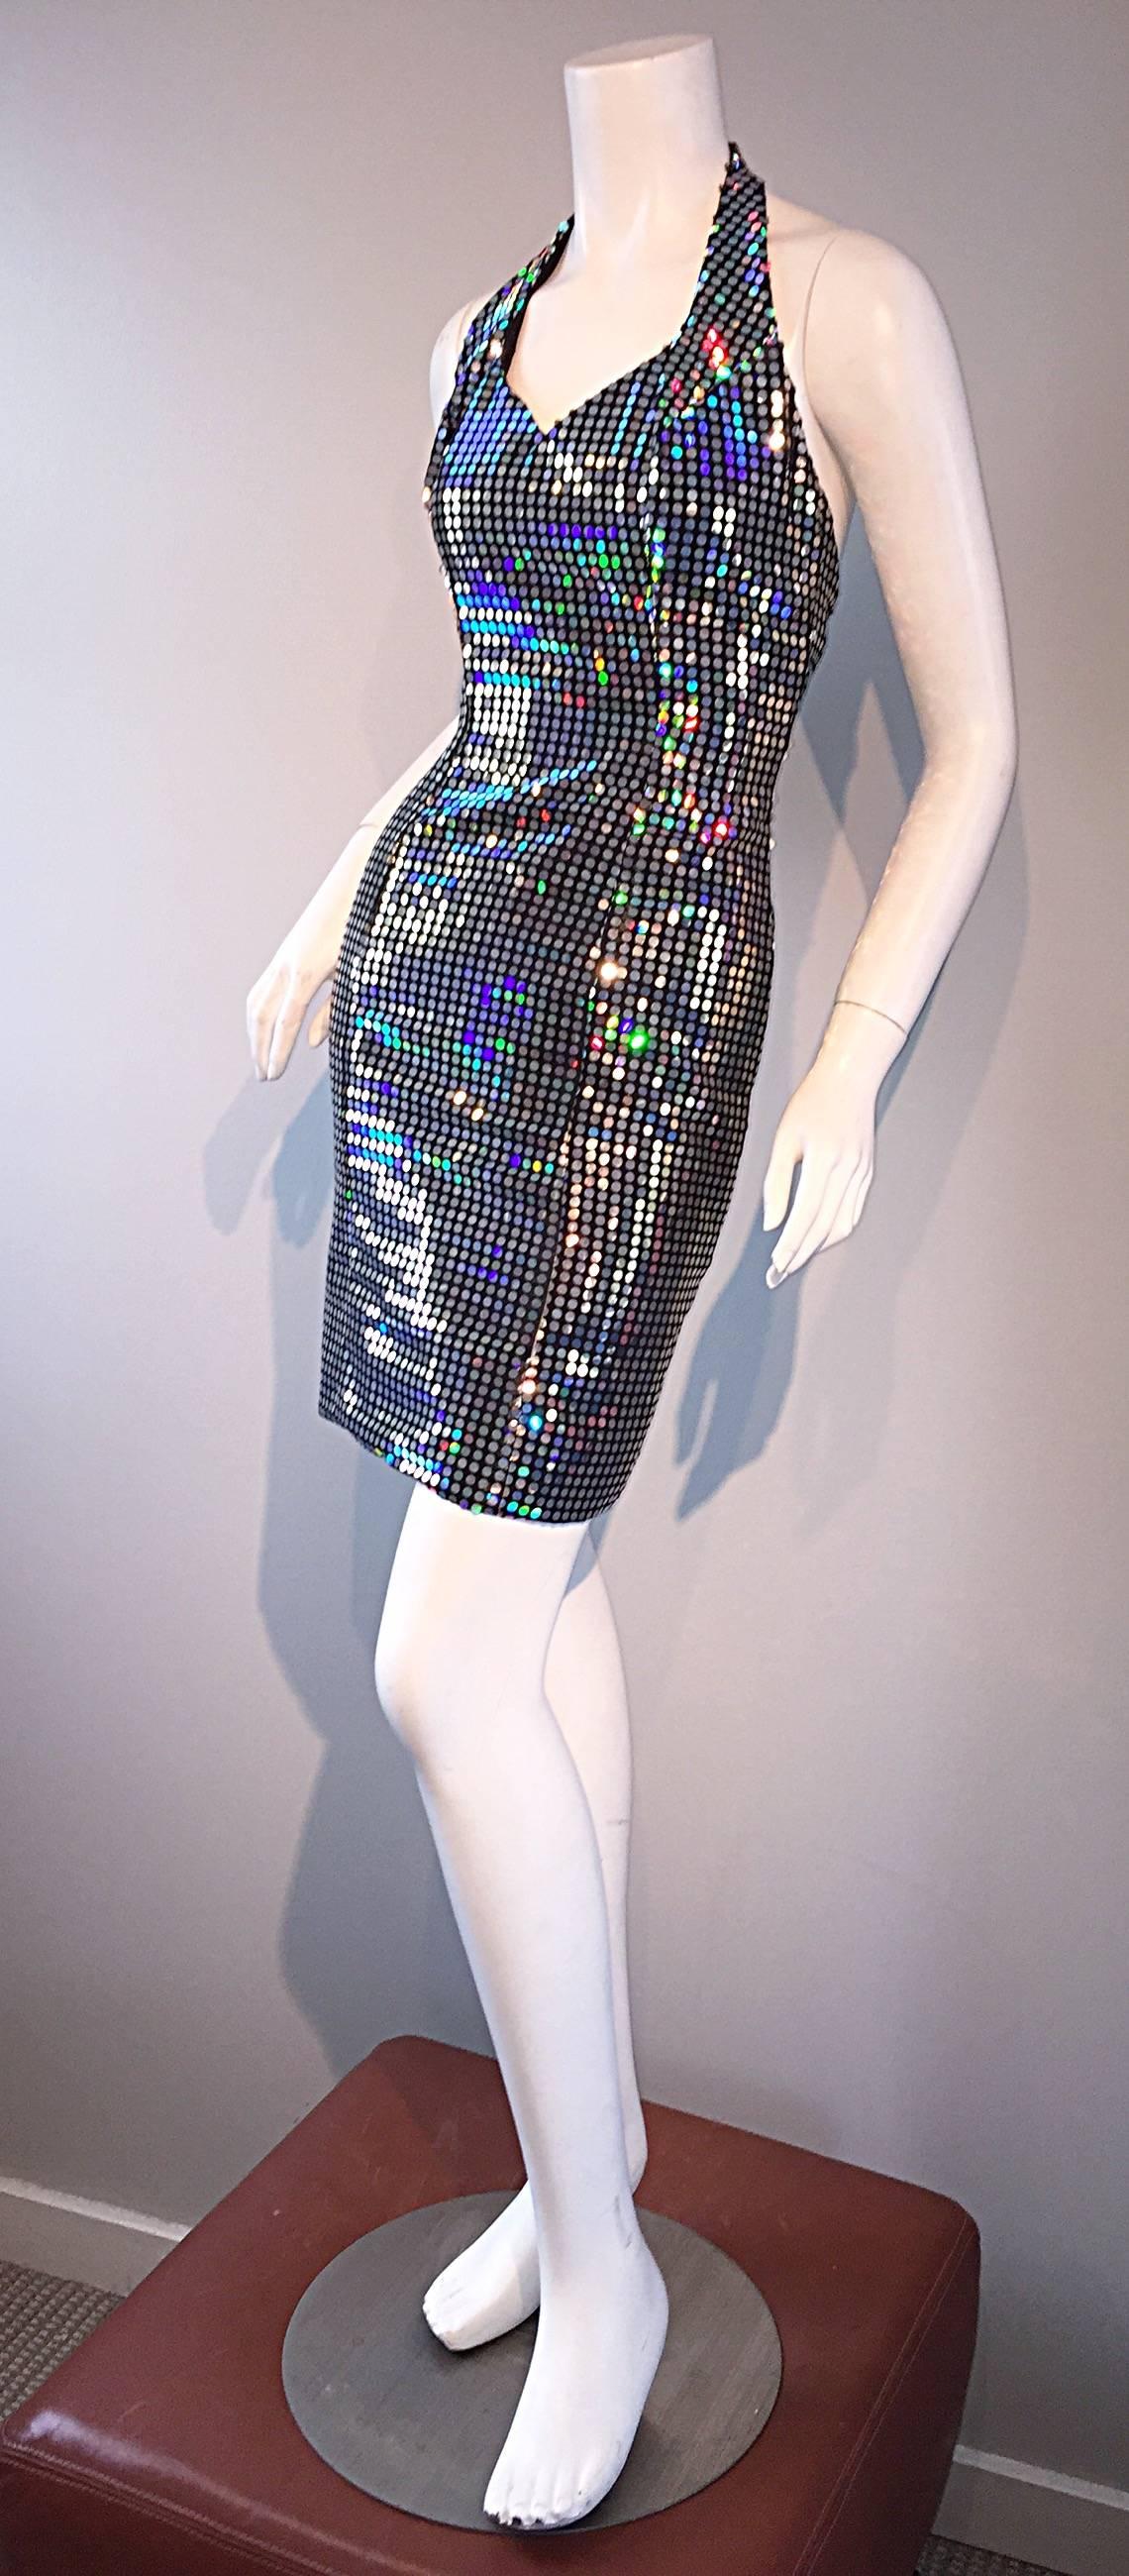 Black Mike Benet 1990s Vintage Holographic Mirrored Bodycon Sexy 90s Halter Dress